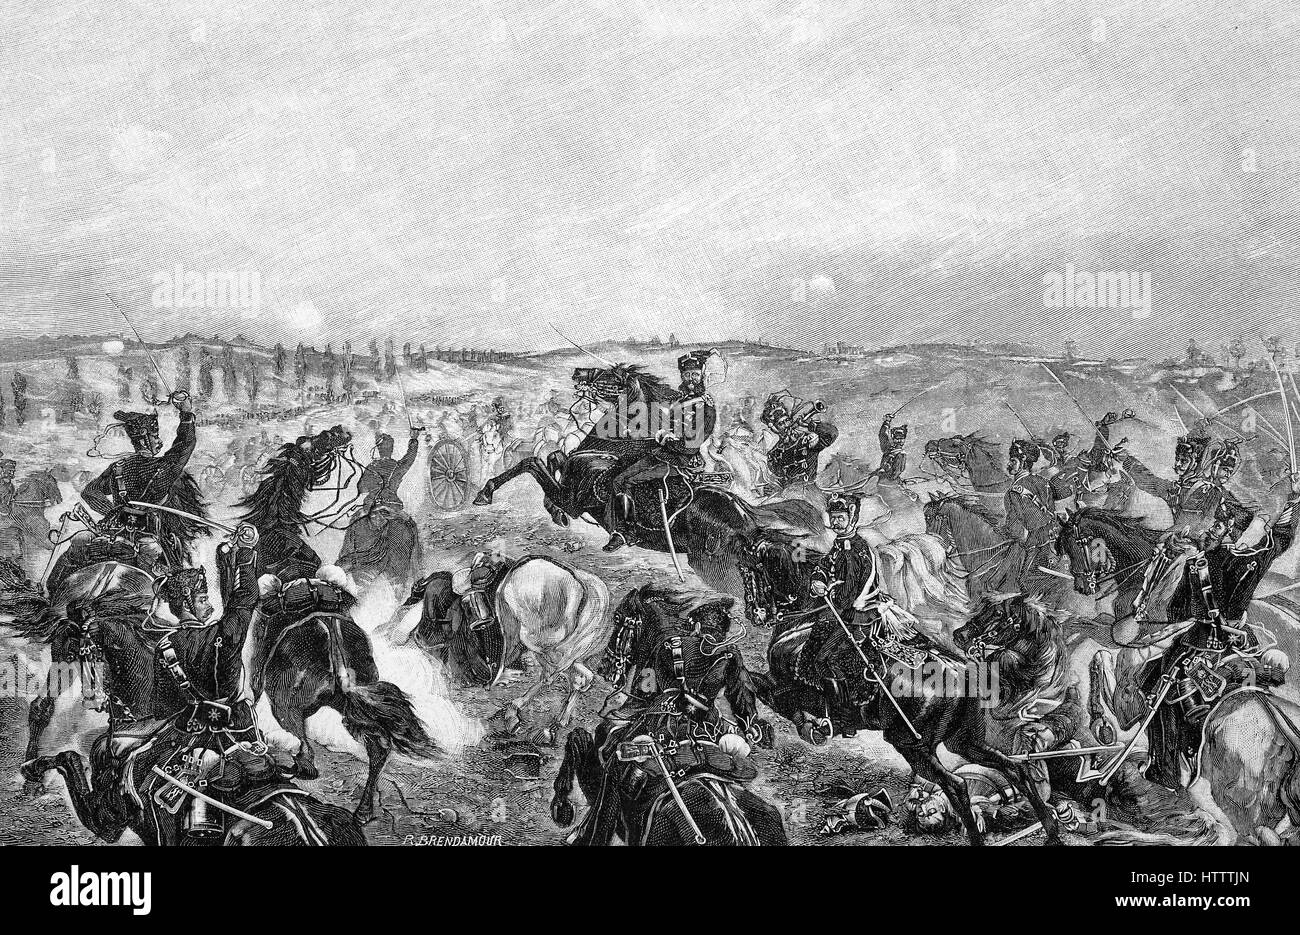 Military people in the Franco-Prussian War 1870 - 1871, Attack of the ducal Brunswick Hussar Regiment No. 17 near Flavigny, France, reproduction of a woodcut from 1882, digital improved Stock Photo